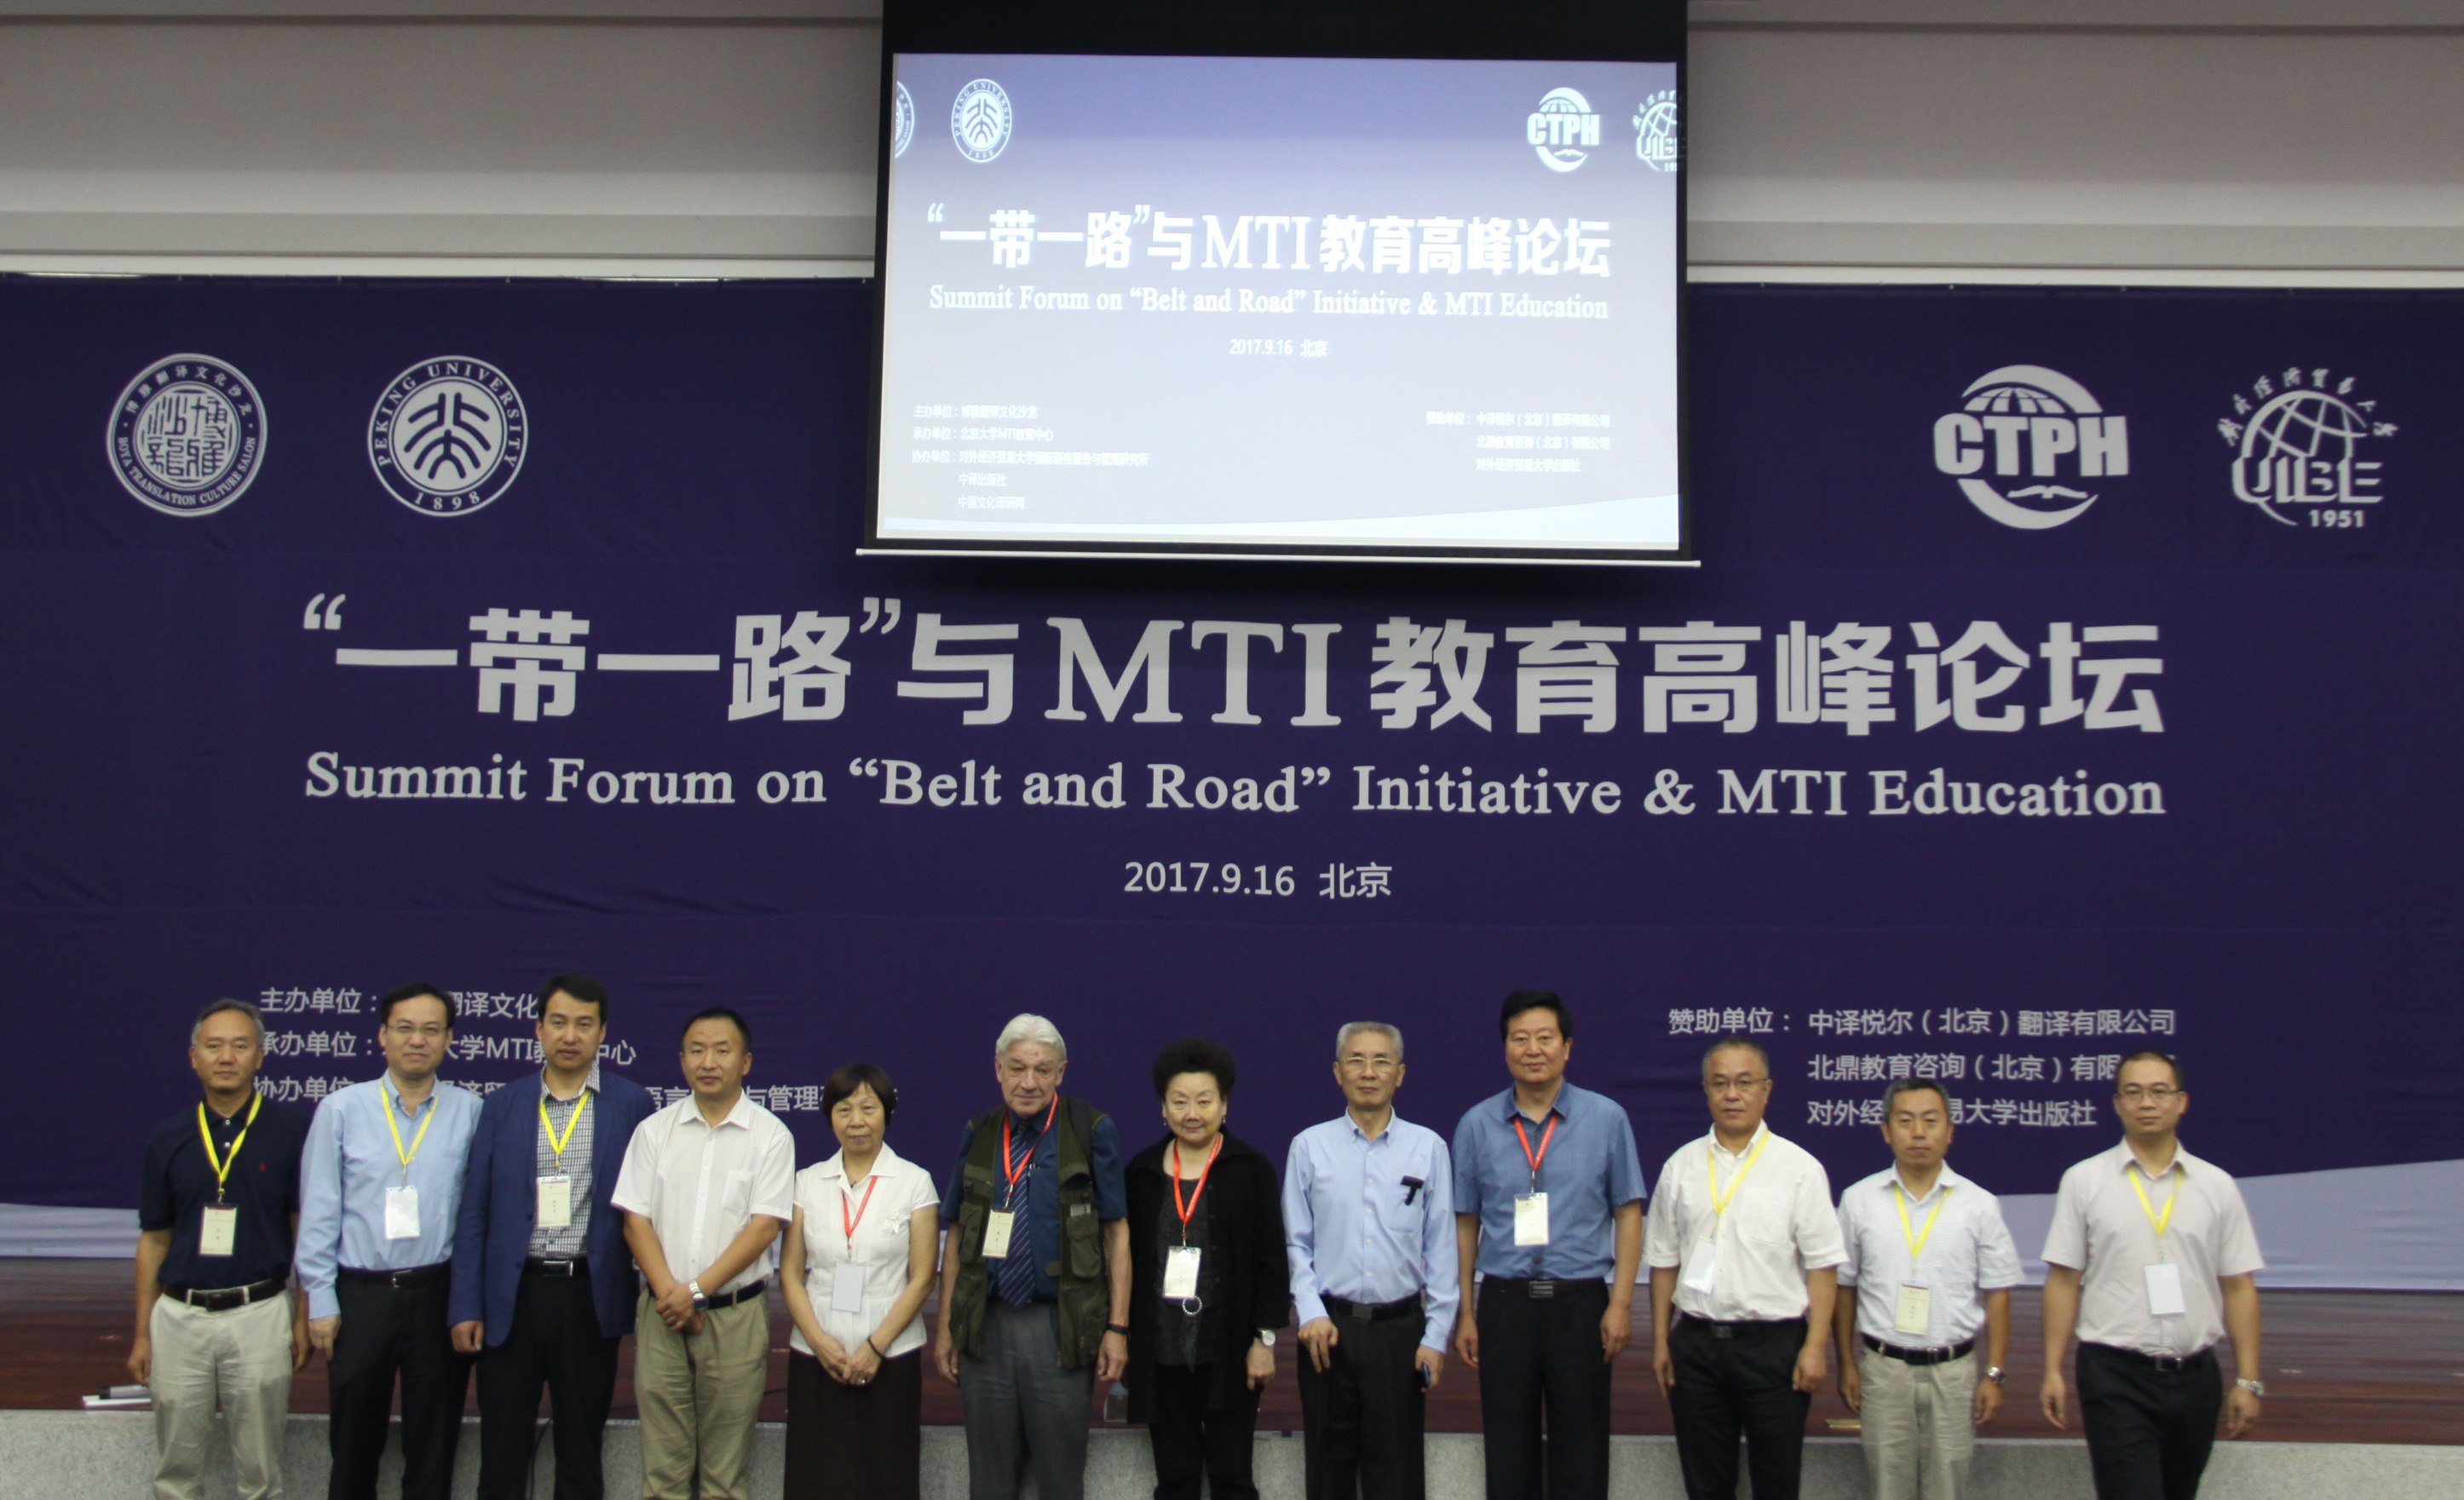 Rankings for MTI education released